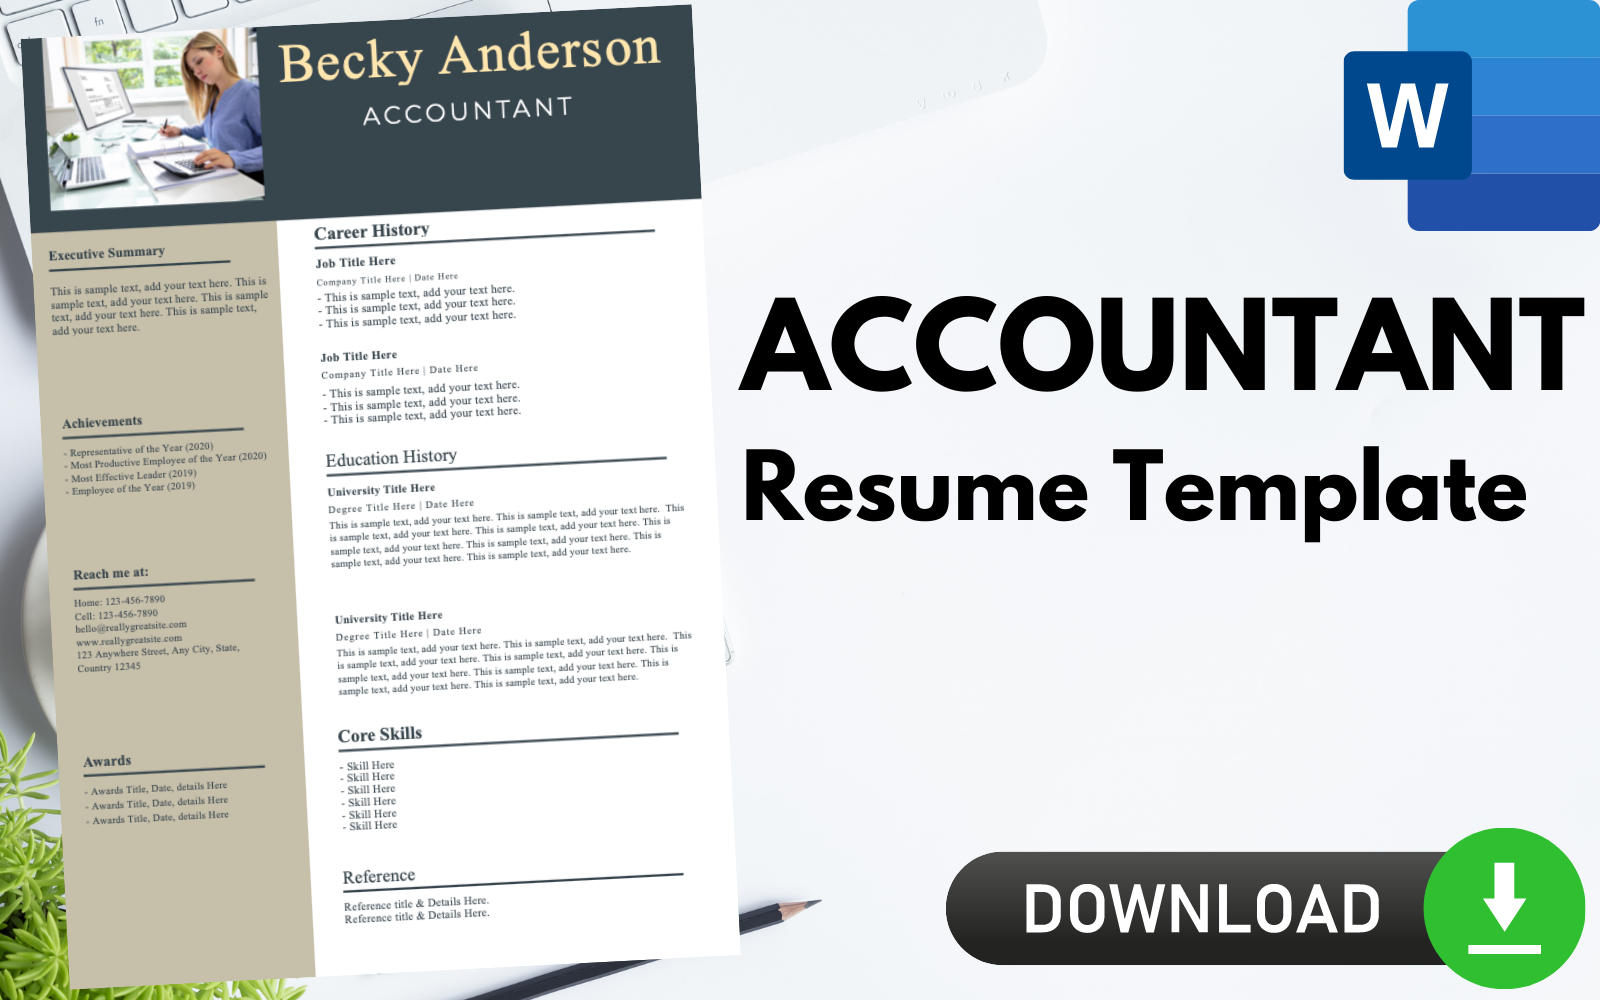 Single Page Resume / CV Template for ACCOUNTANTS.